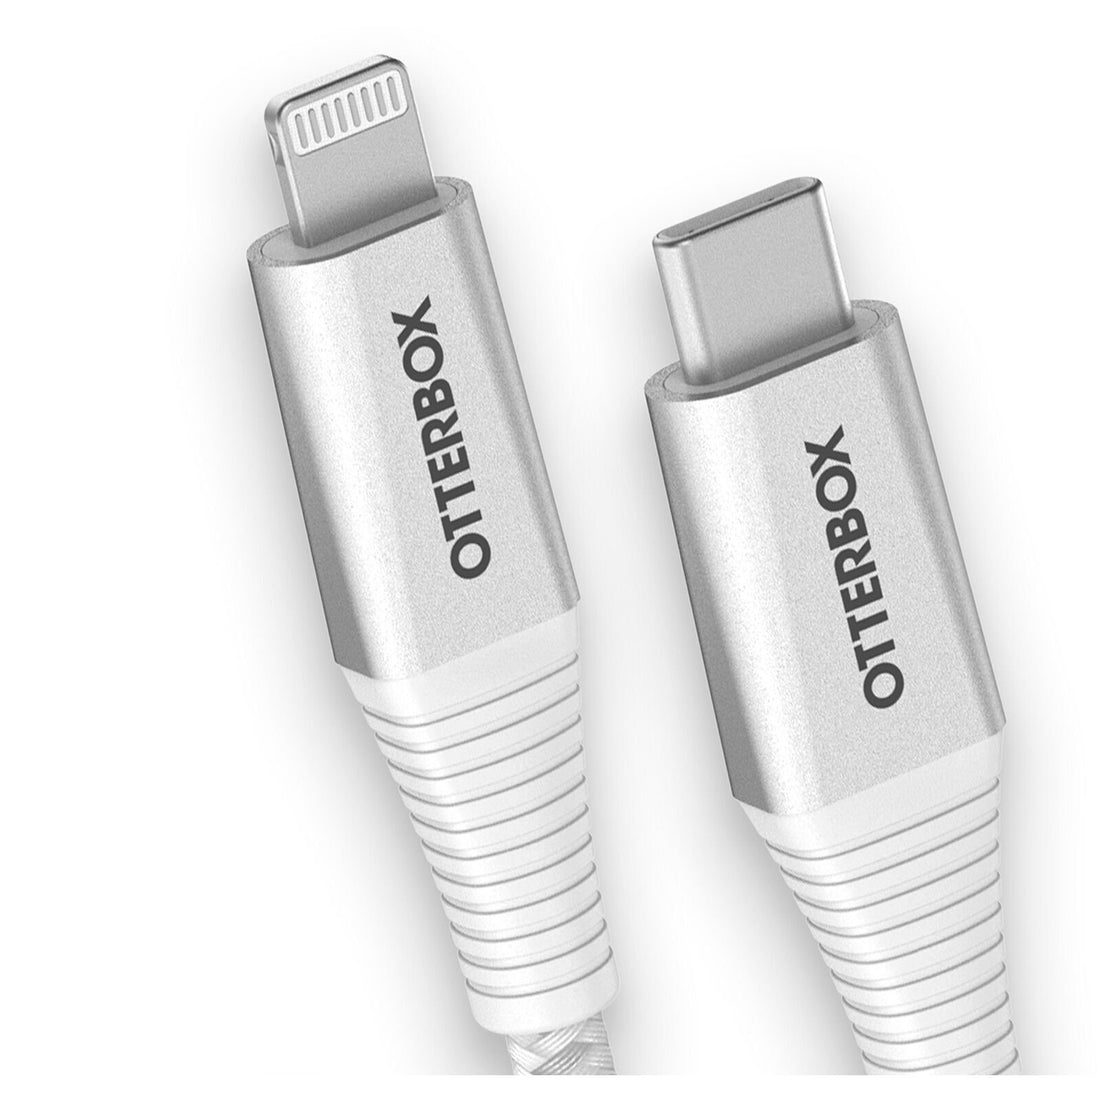 OtterBox Premium Pro Lightning to USB-C Fast Charge 2M Cable - Ghostly Paste (New)